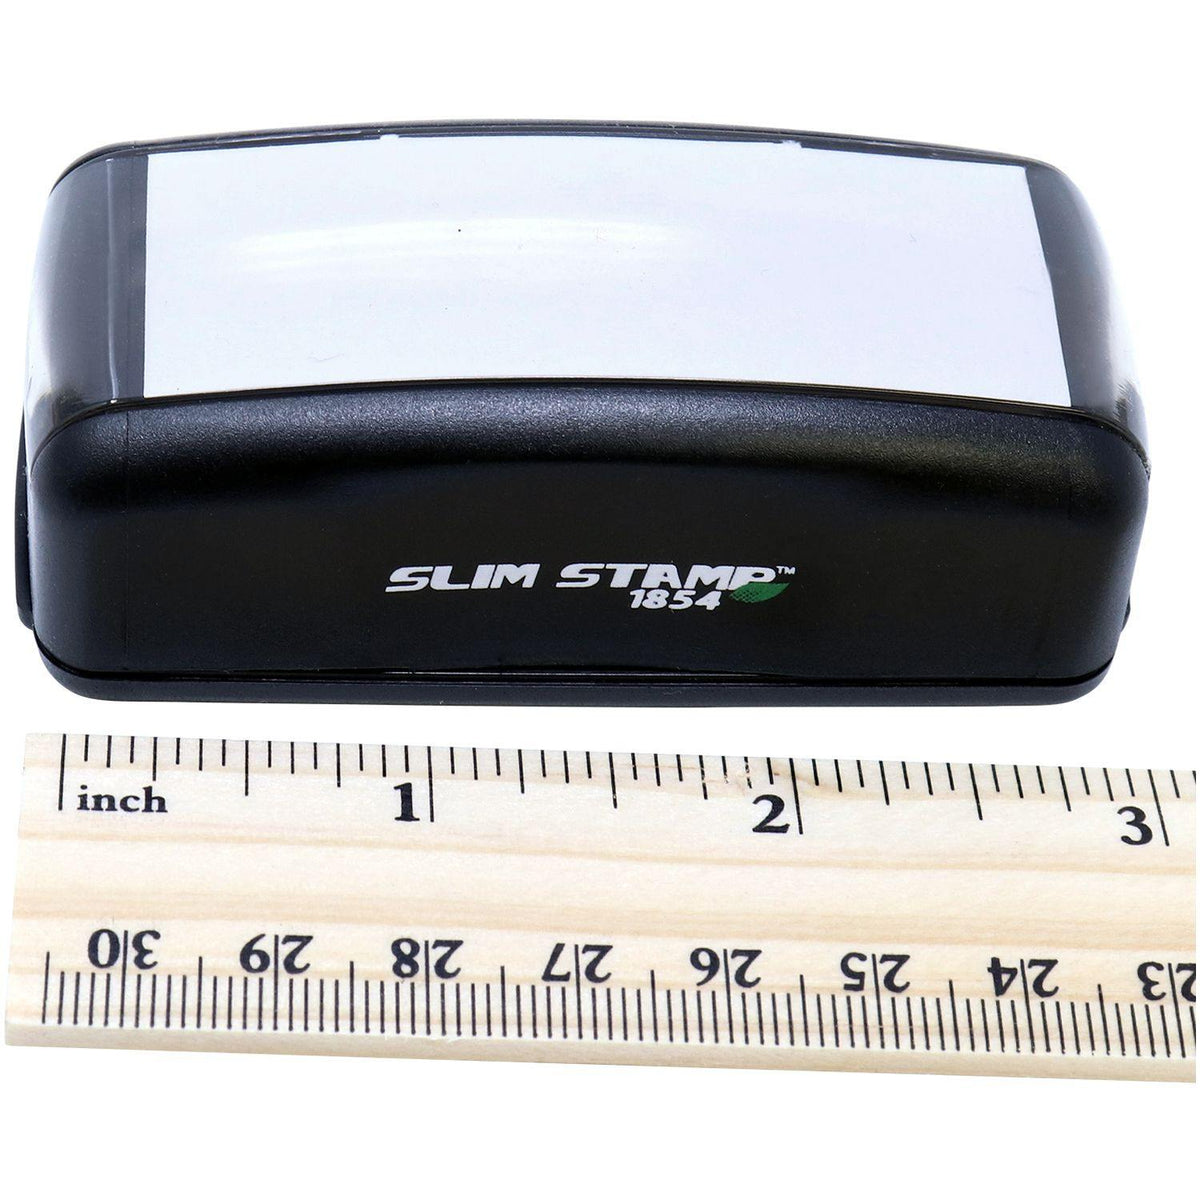 Measurement Large Pre Inked Deposition Exhibit Stamp with Ruler